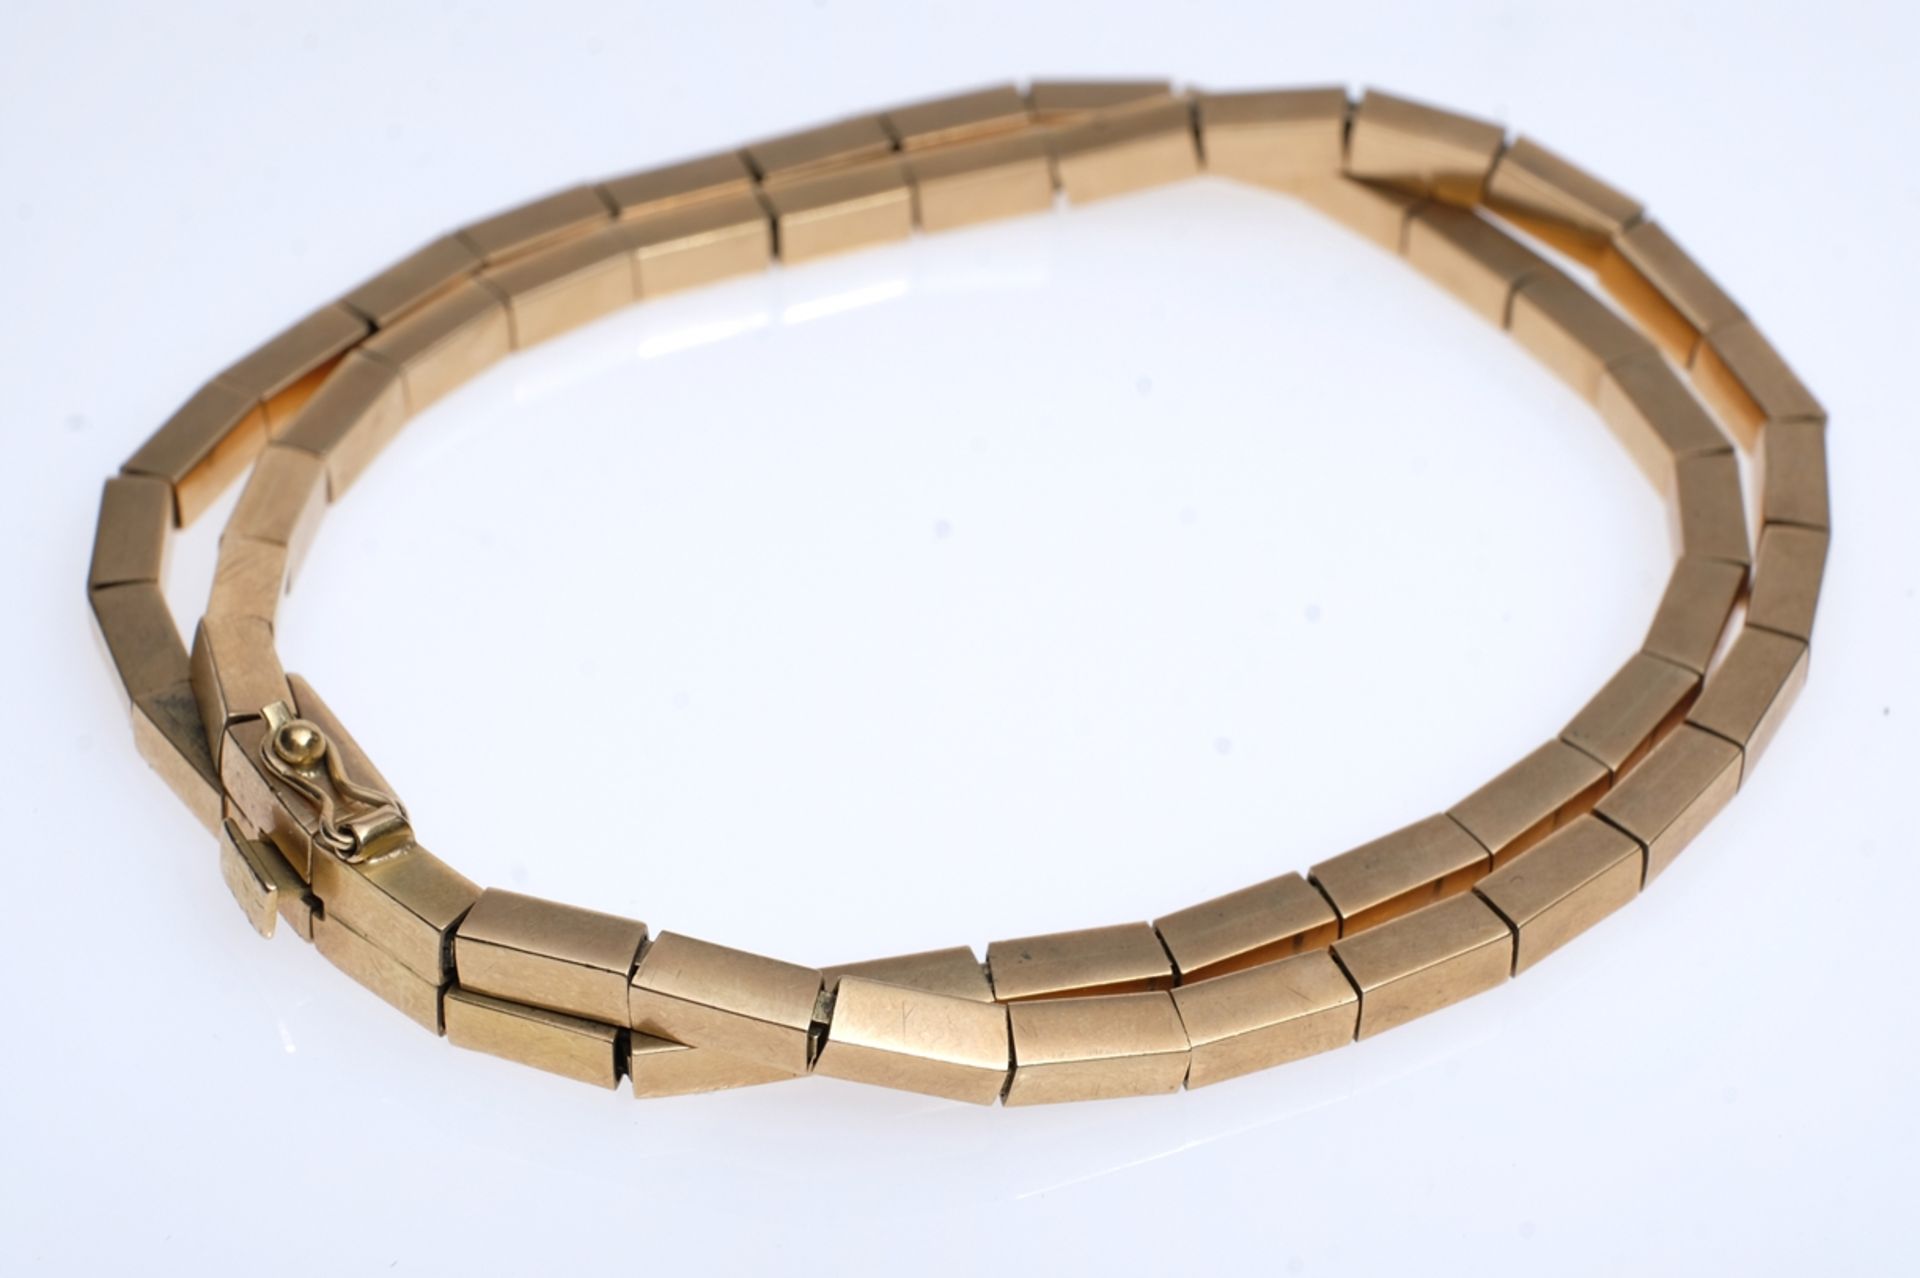 Articulated gold bracelet, 750 GG, two articulated strands that join at the clasp. Push-in clasp wi